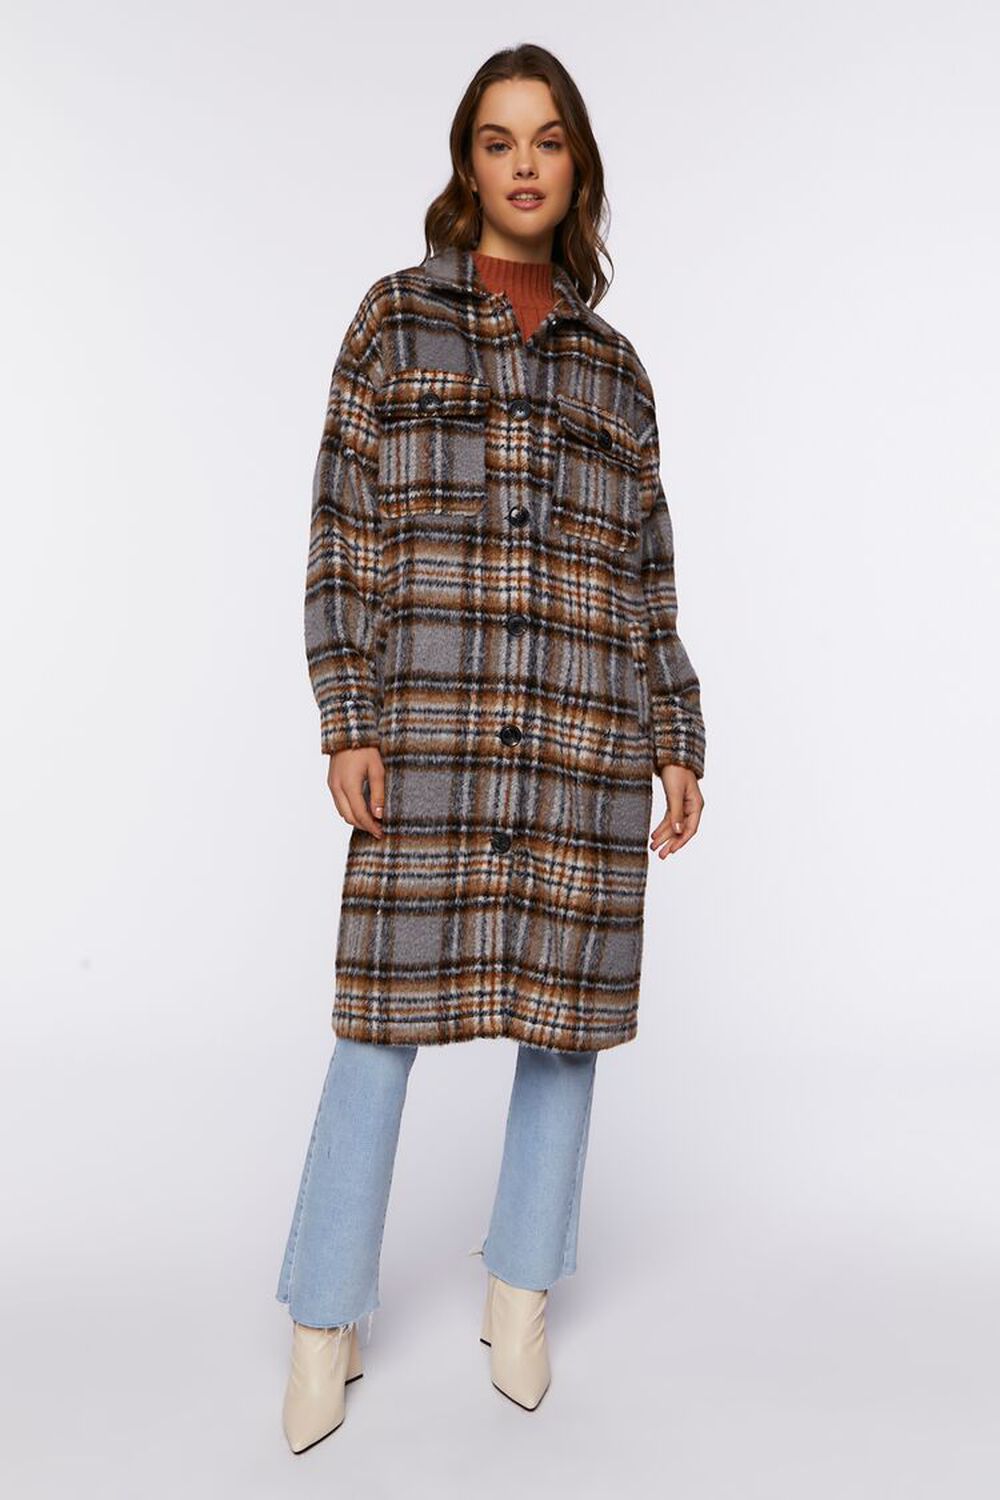 GREY/MULTI Plaid Buttoned Duster Jacket, image 1